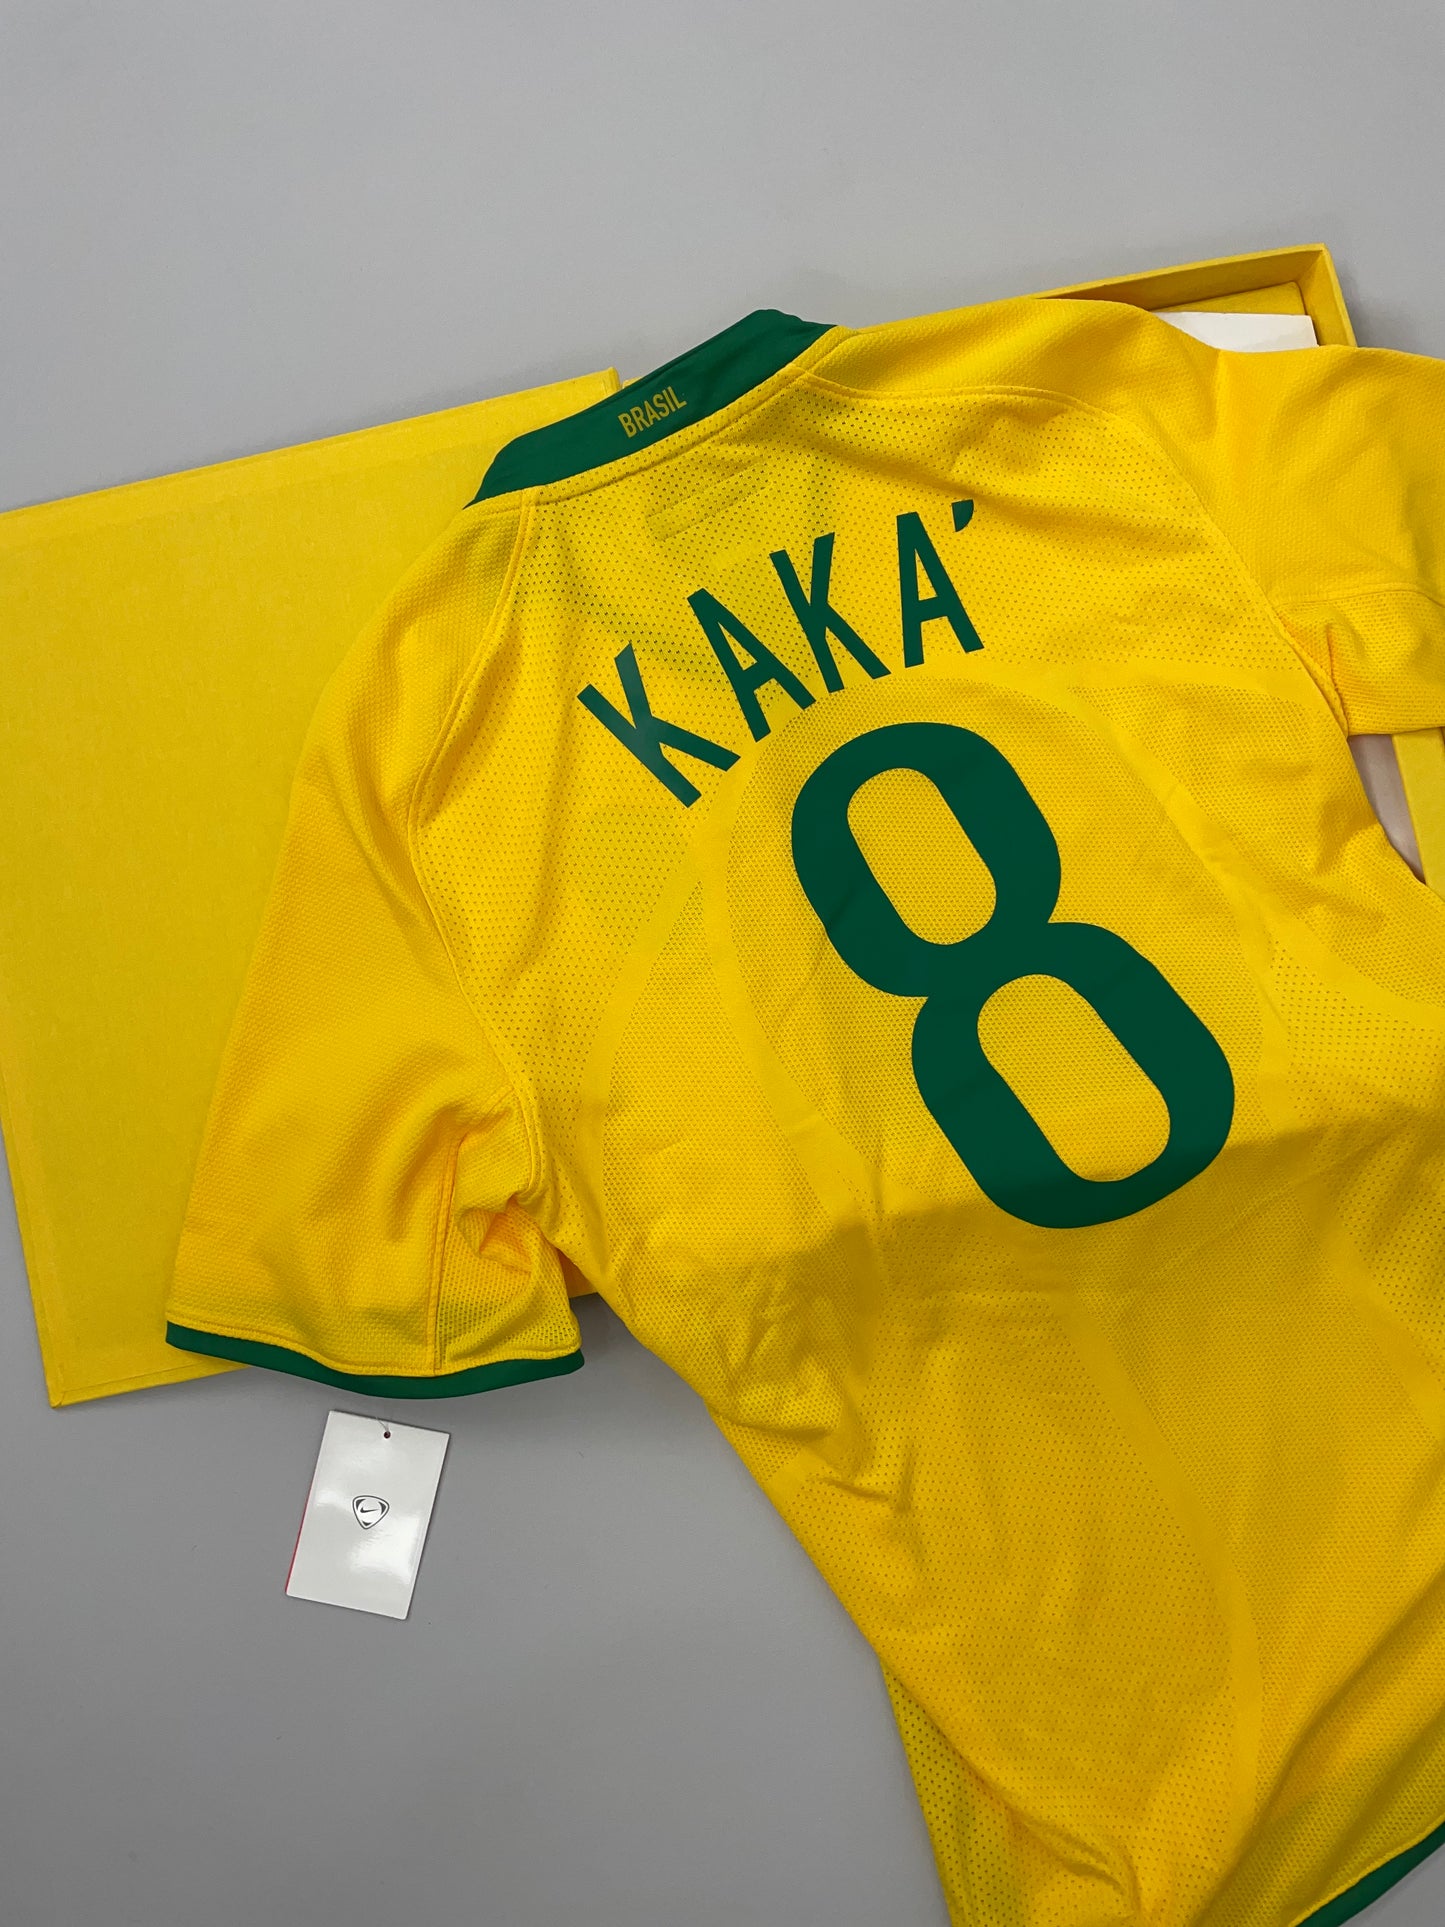 2008/10 BRAZIL KAKA #8 LIMITED EDITION PLAYER ISSUE HOME SHIRT (L) NIKE